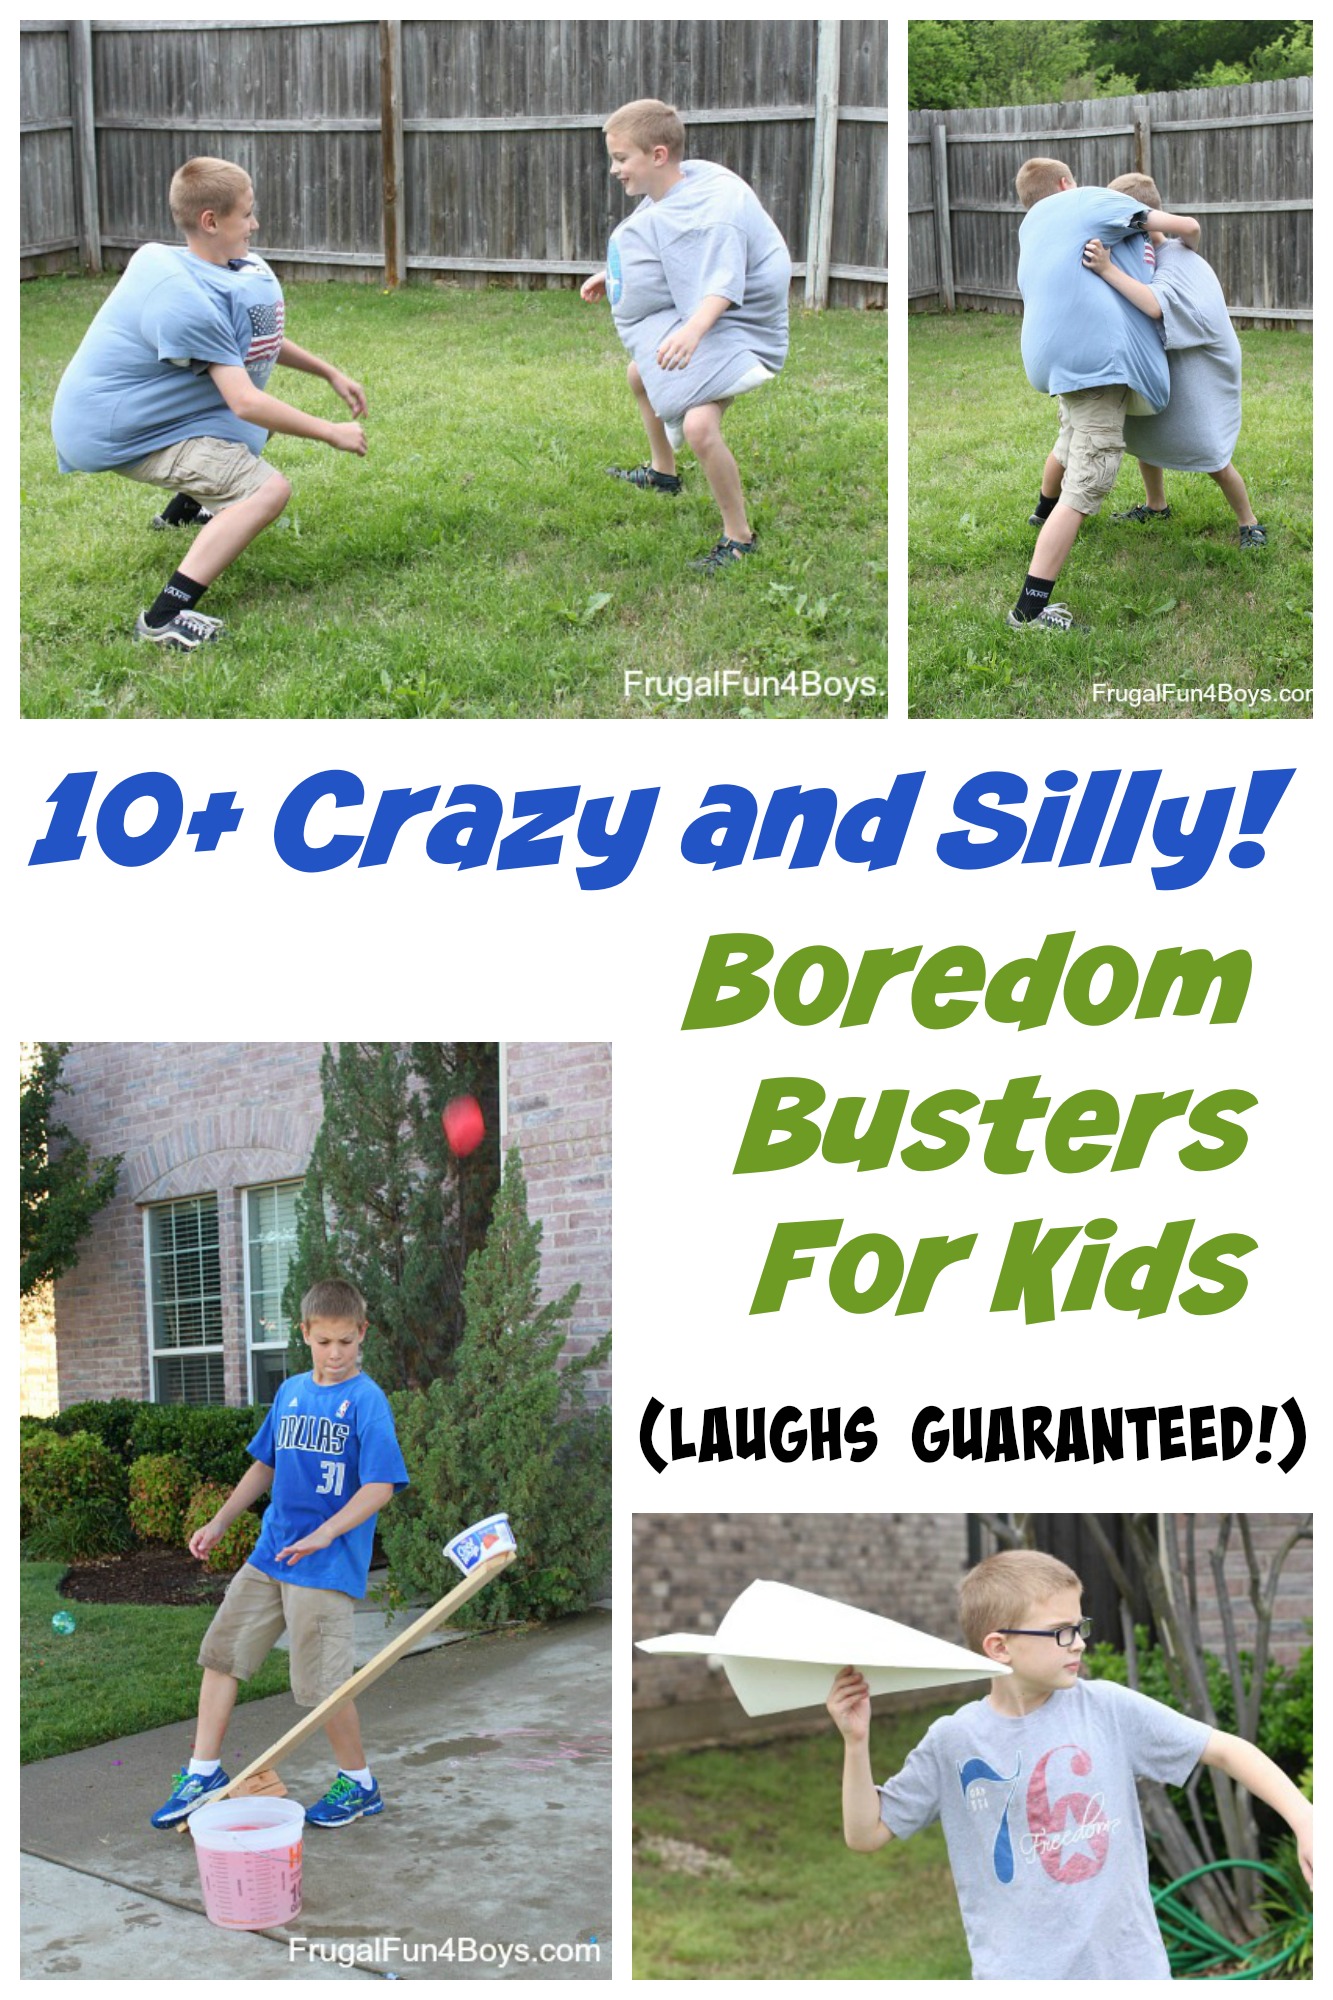 10+ Crazy and Silly Boredom Busters for Kids